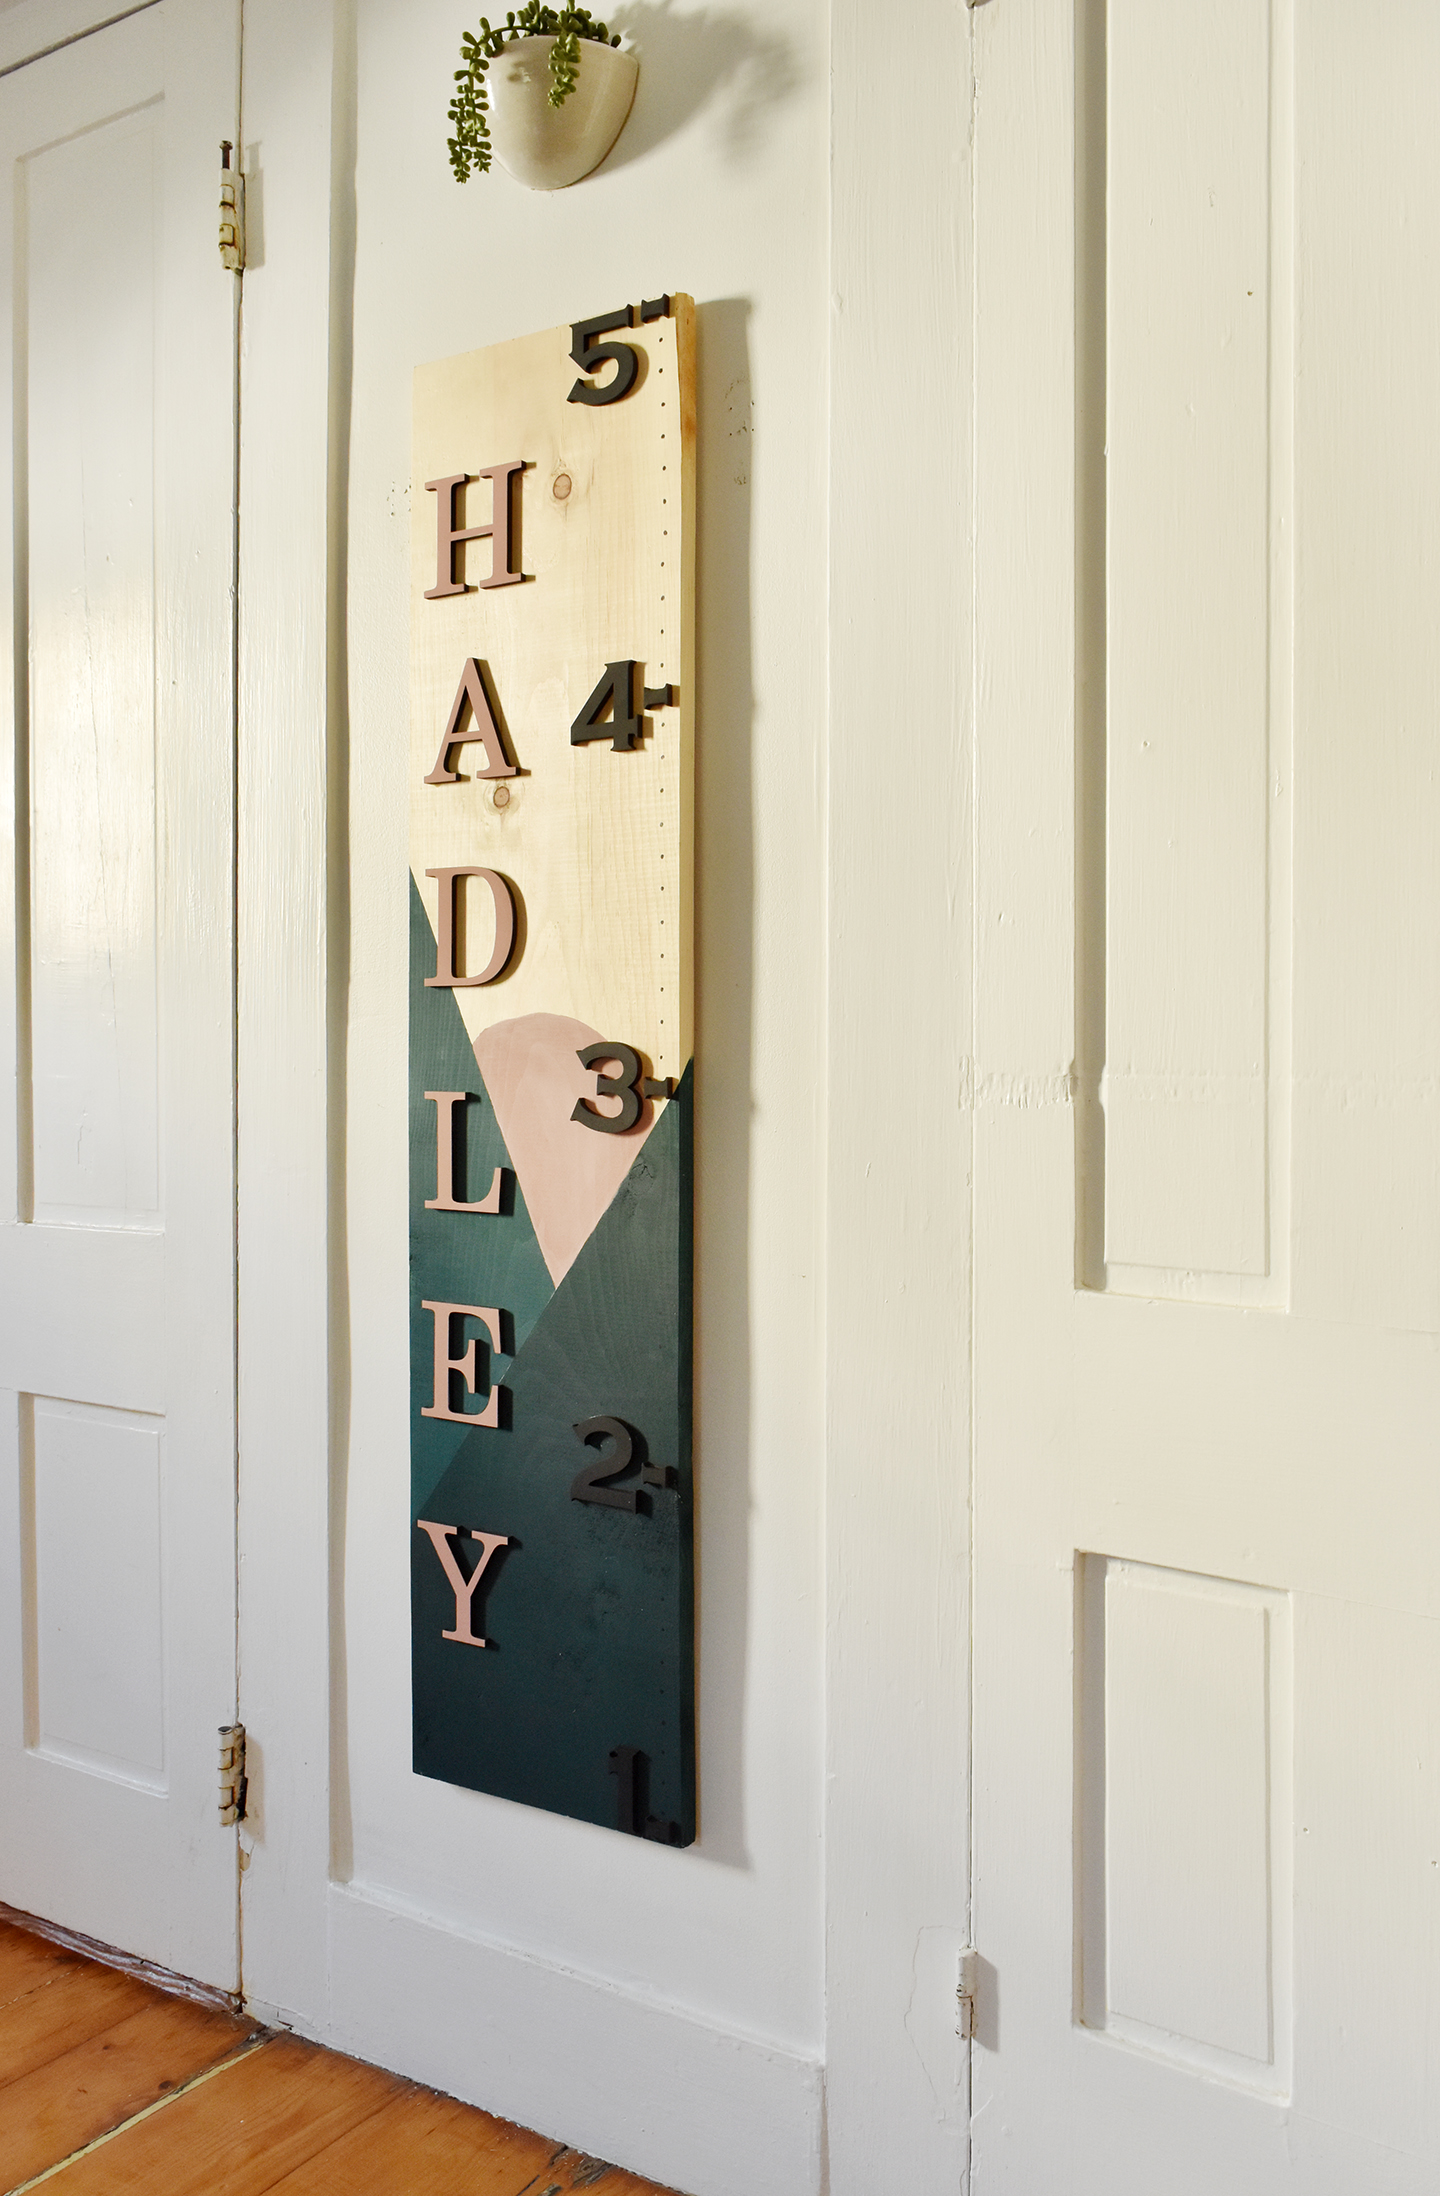 Easy DIY Wooden Height Chart /// By Design Fixation #height #chart #growth #diy #wood